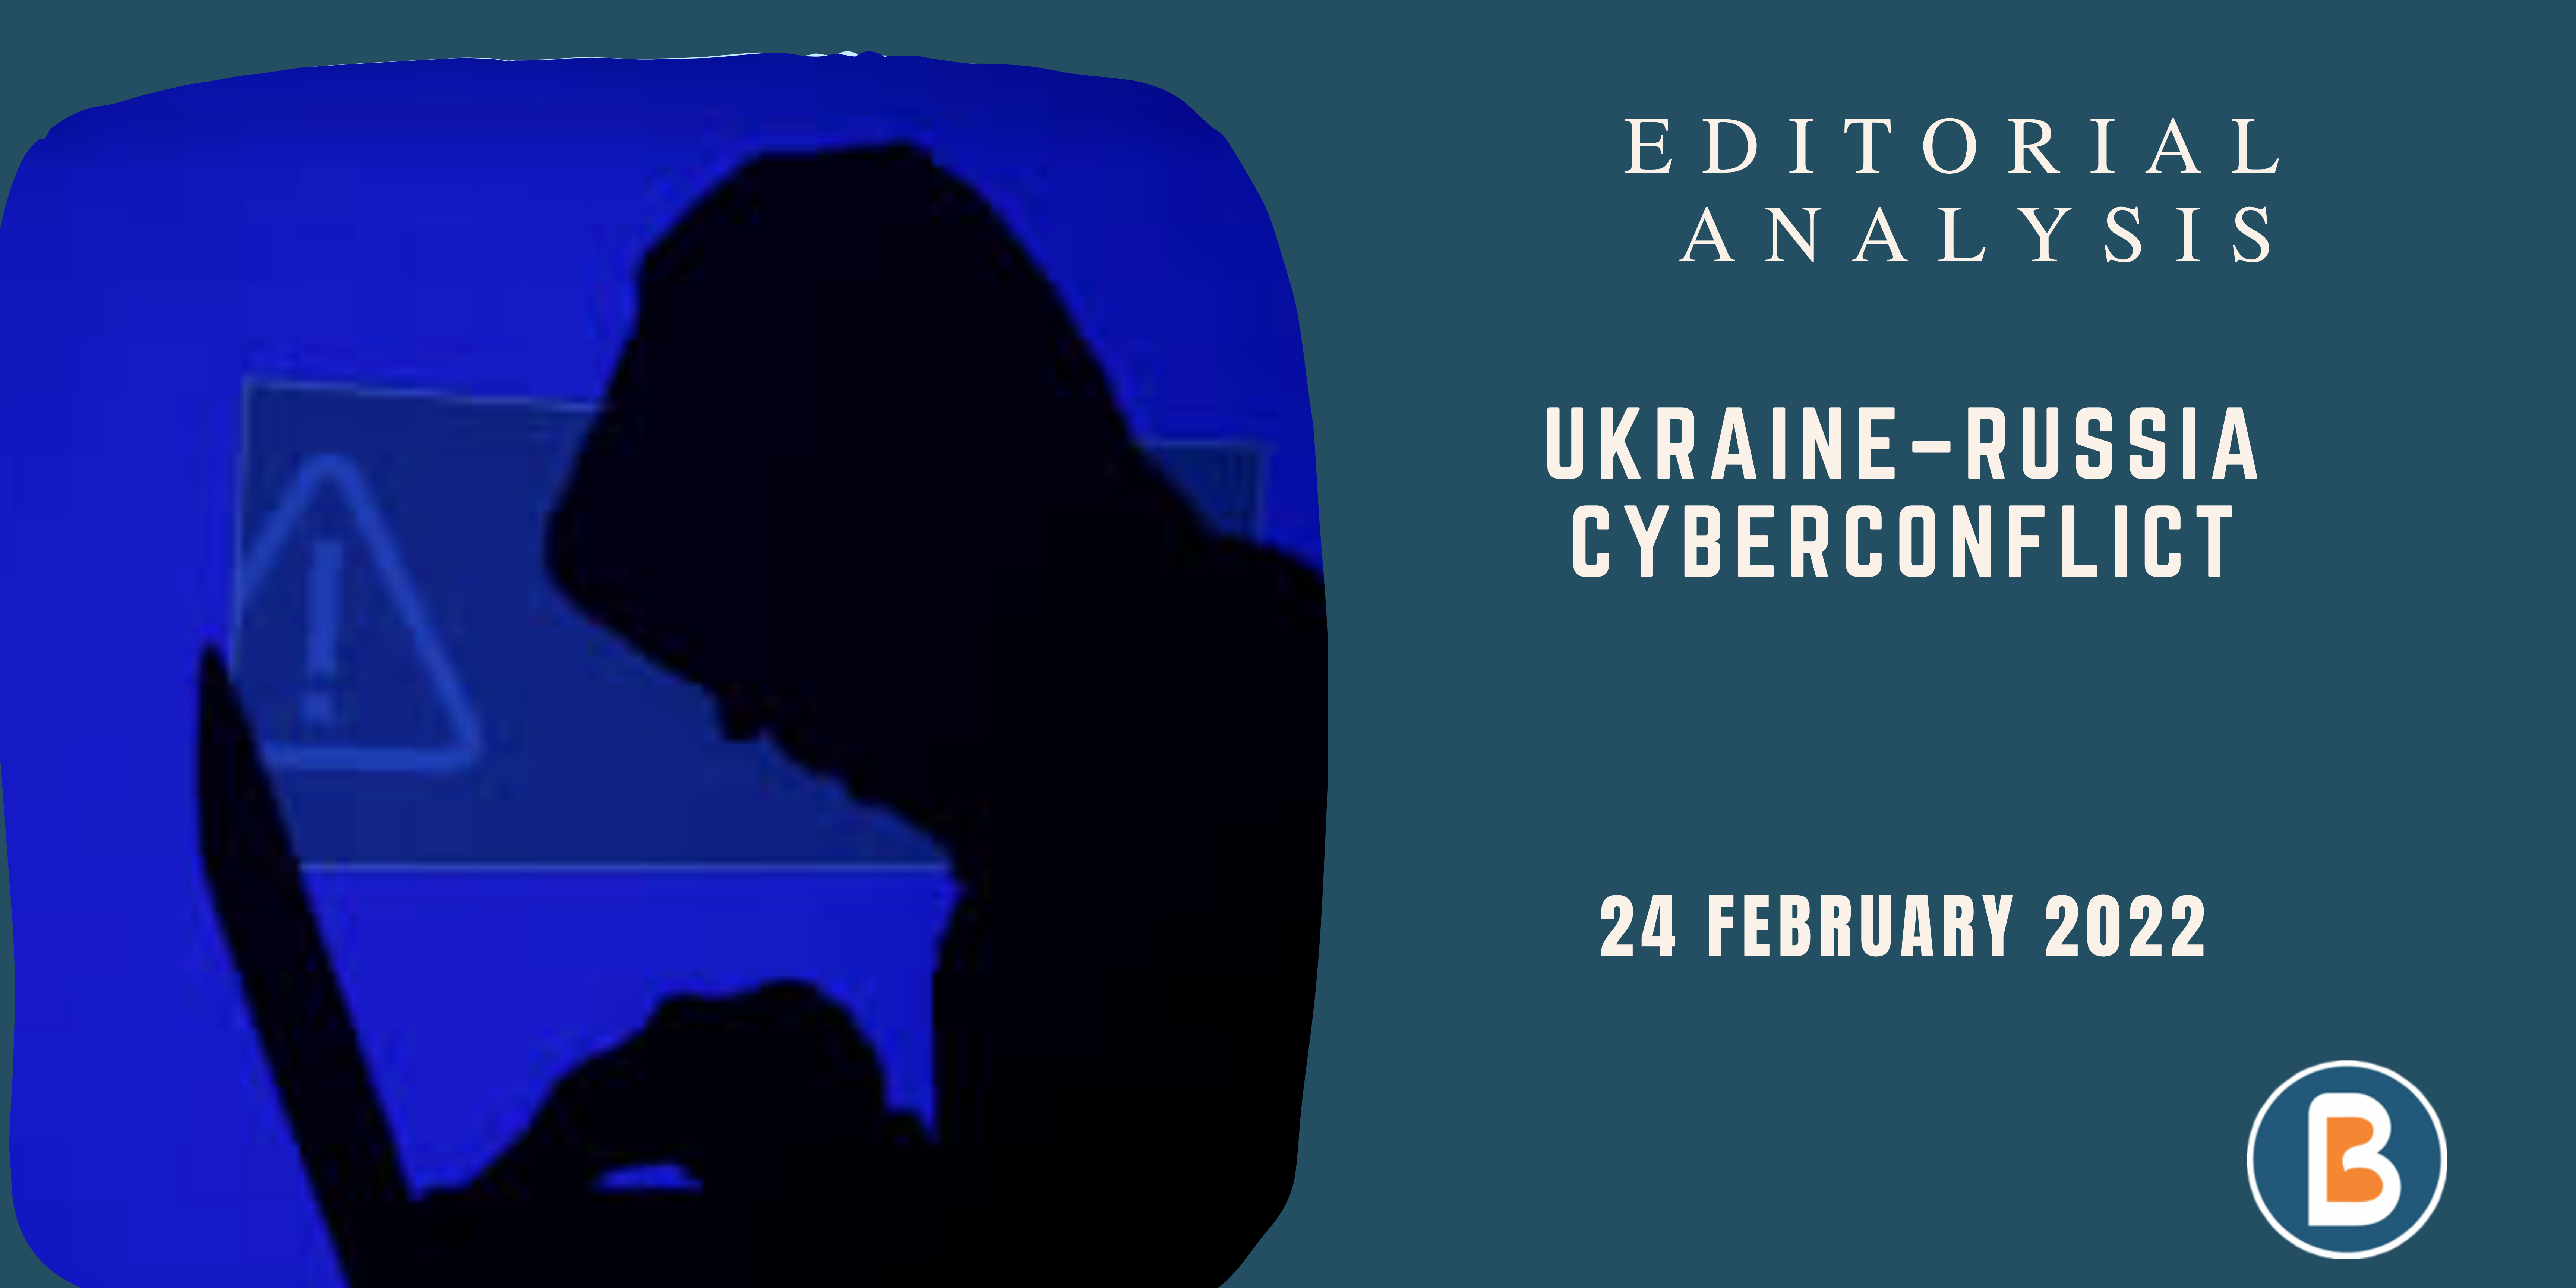 Editorial Analysis for UPSC - Ukraine - Russia Cyberconflict